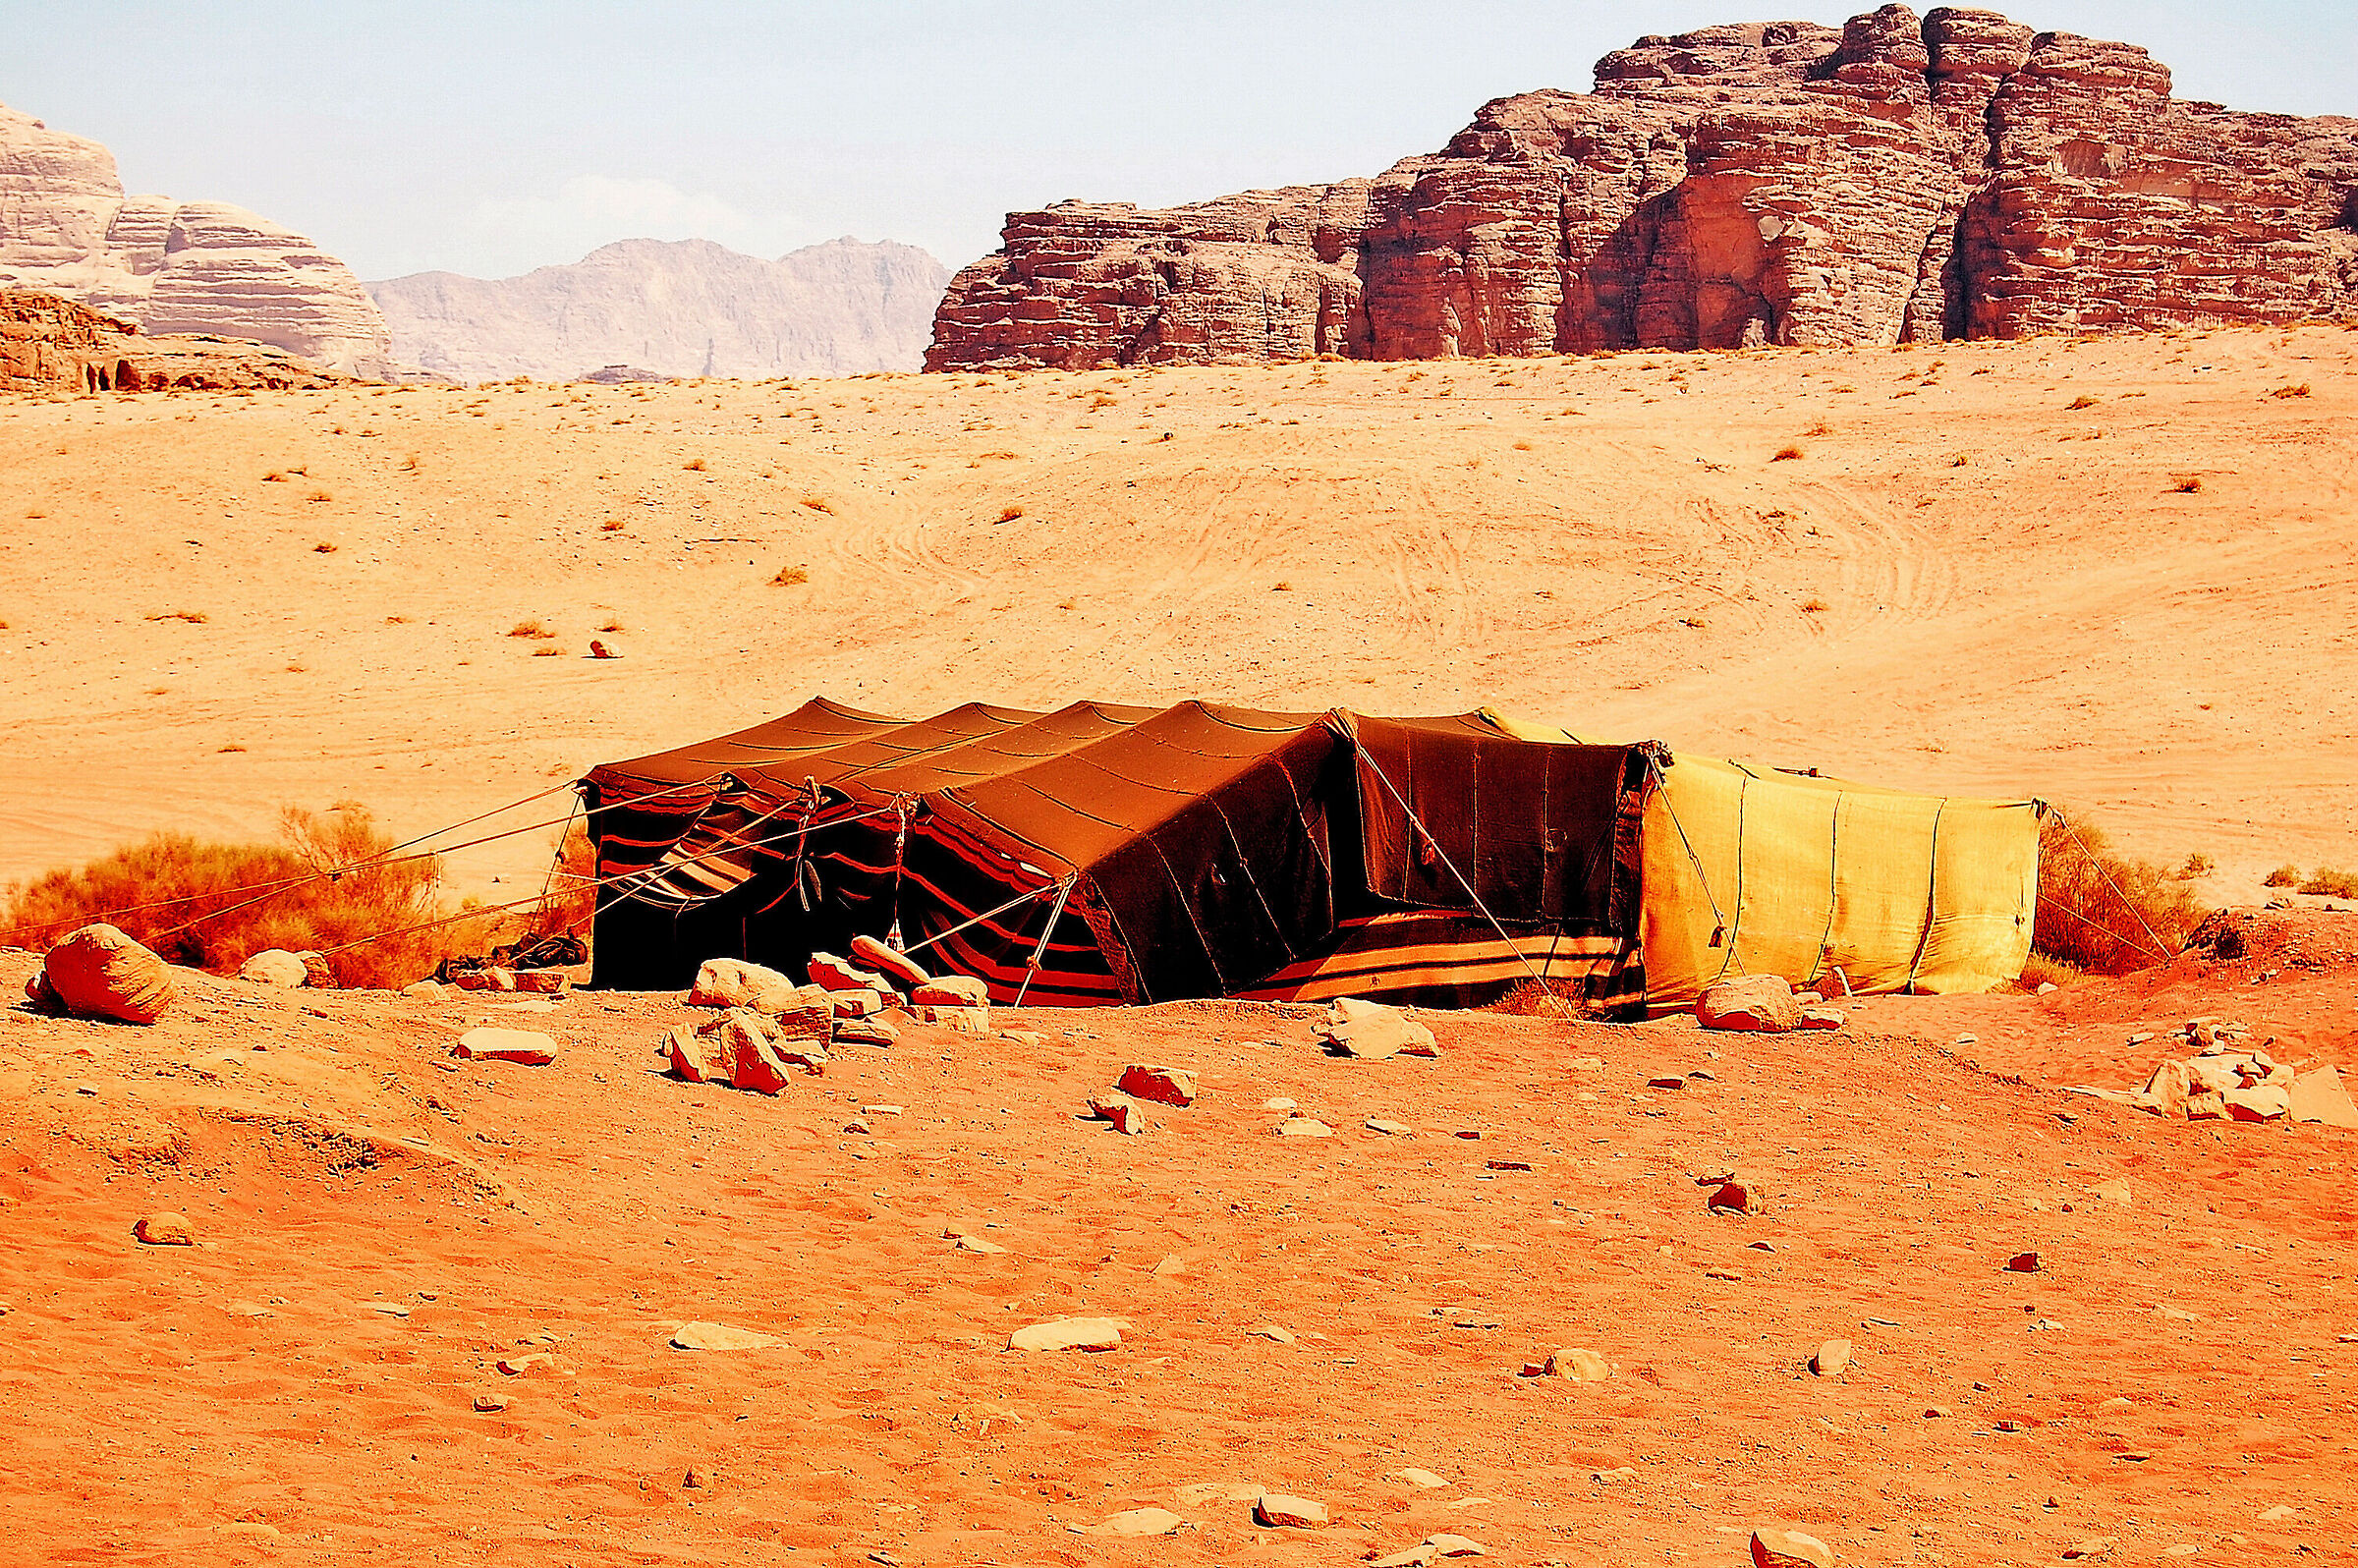 With the Bedouins in Wadi Rum...